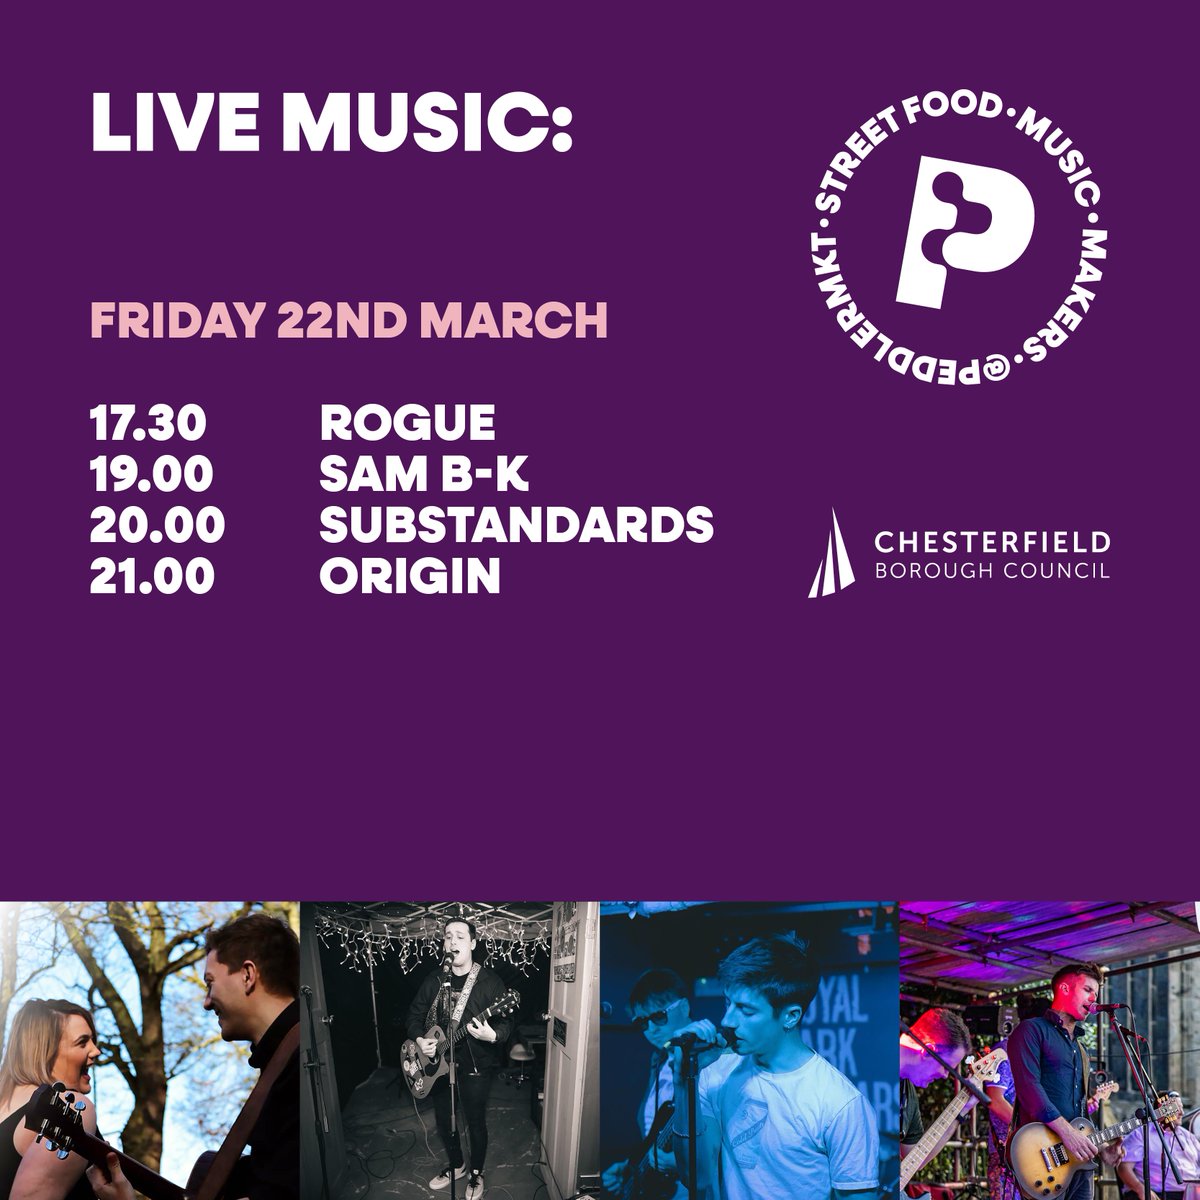 We’ve got a bangin’ line up of music for you this weekend! Doors open at 4pm and our first band takes to the stage at 5.30pm.

Peddler Market Chesterfield Nº3
Fri 22nd March 4—10pm
Sat 23rd March 12—9.30pm
New Square, S40 1AH

#peddlermarket #peddlermkt #LoveChesterfield